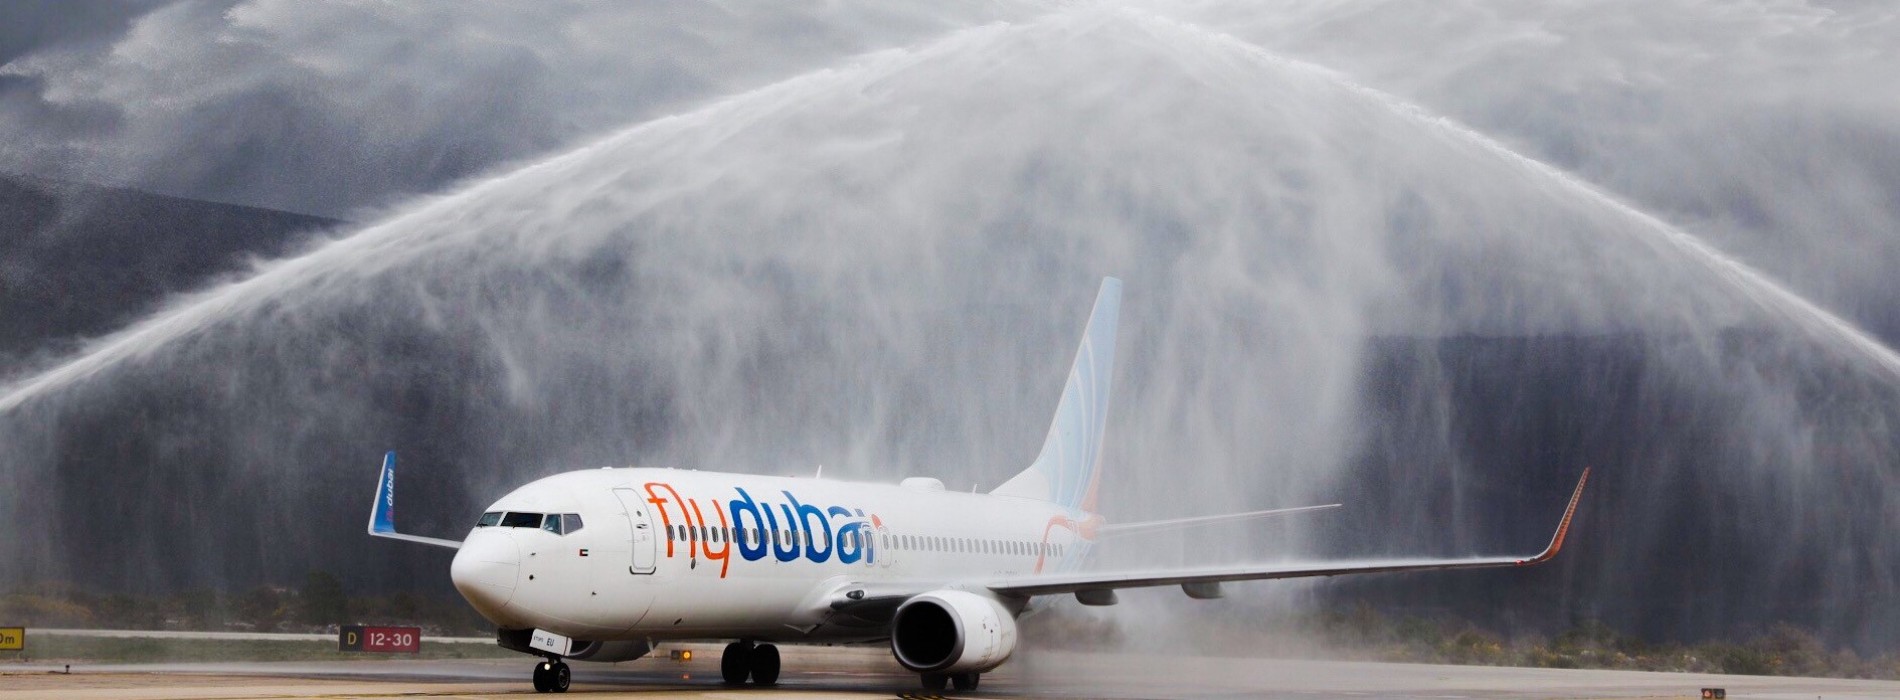 flydubai launches first direct flight from Dubai to Dubrovnik